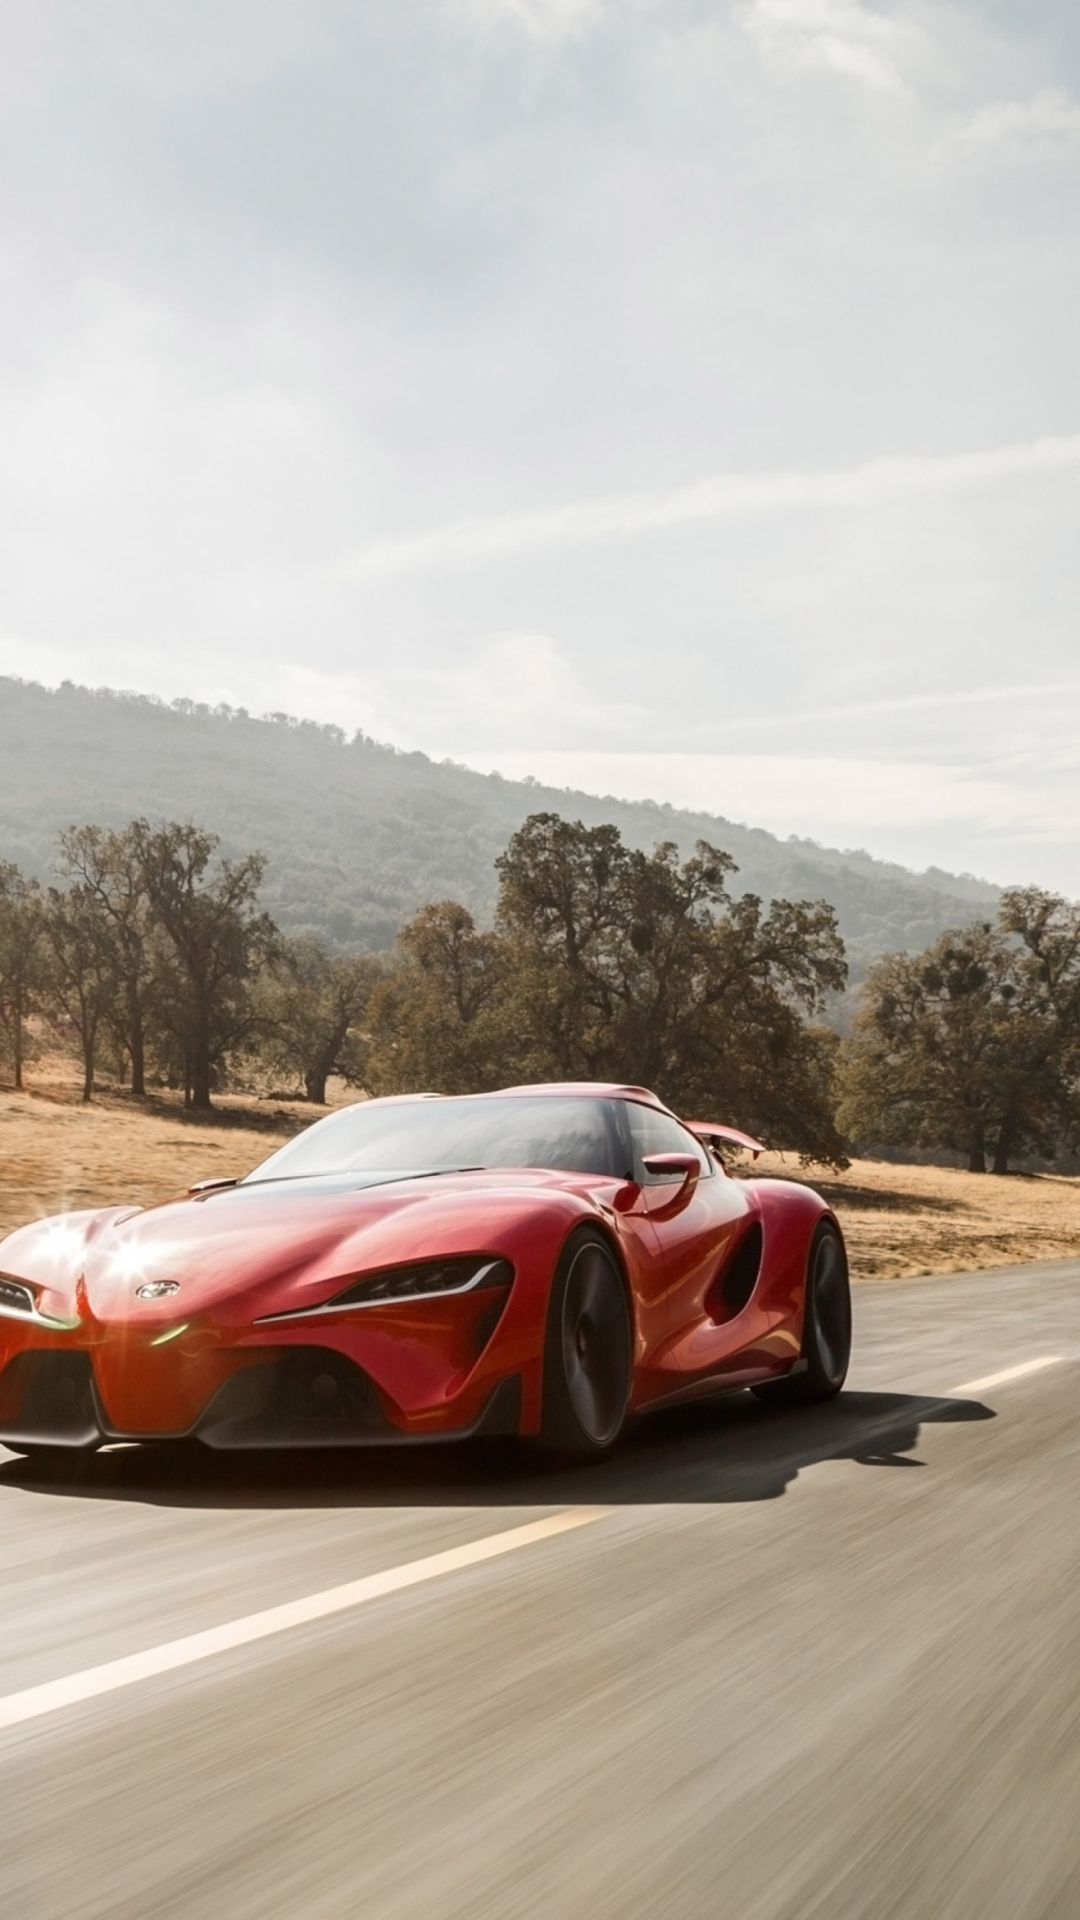 2014 Toyota Ft 1 Concept Front Angle screenshot #1 1080x1920